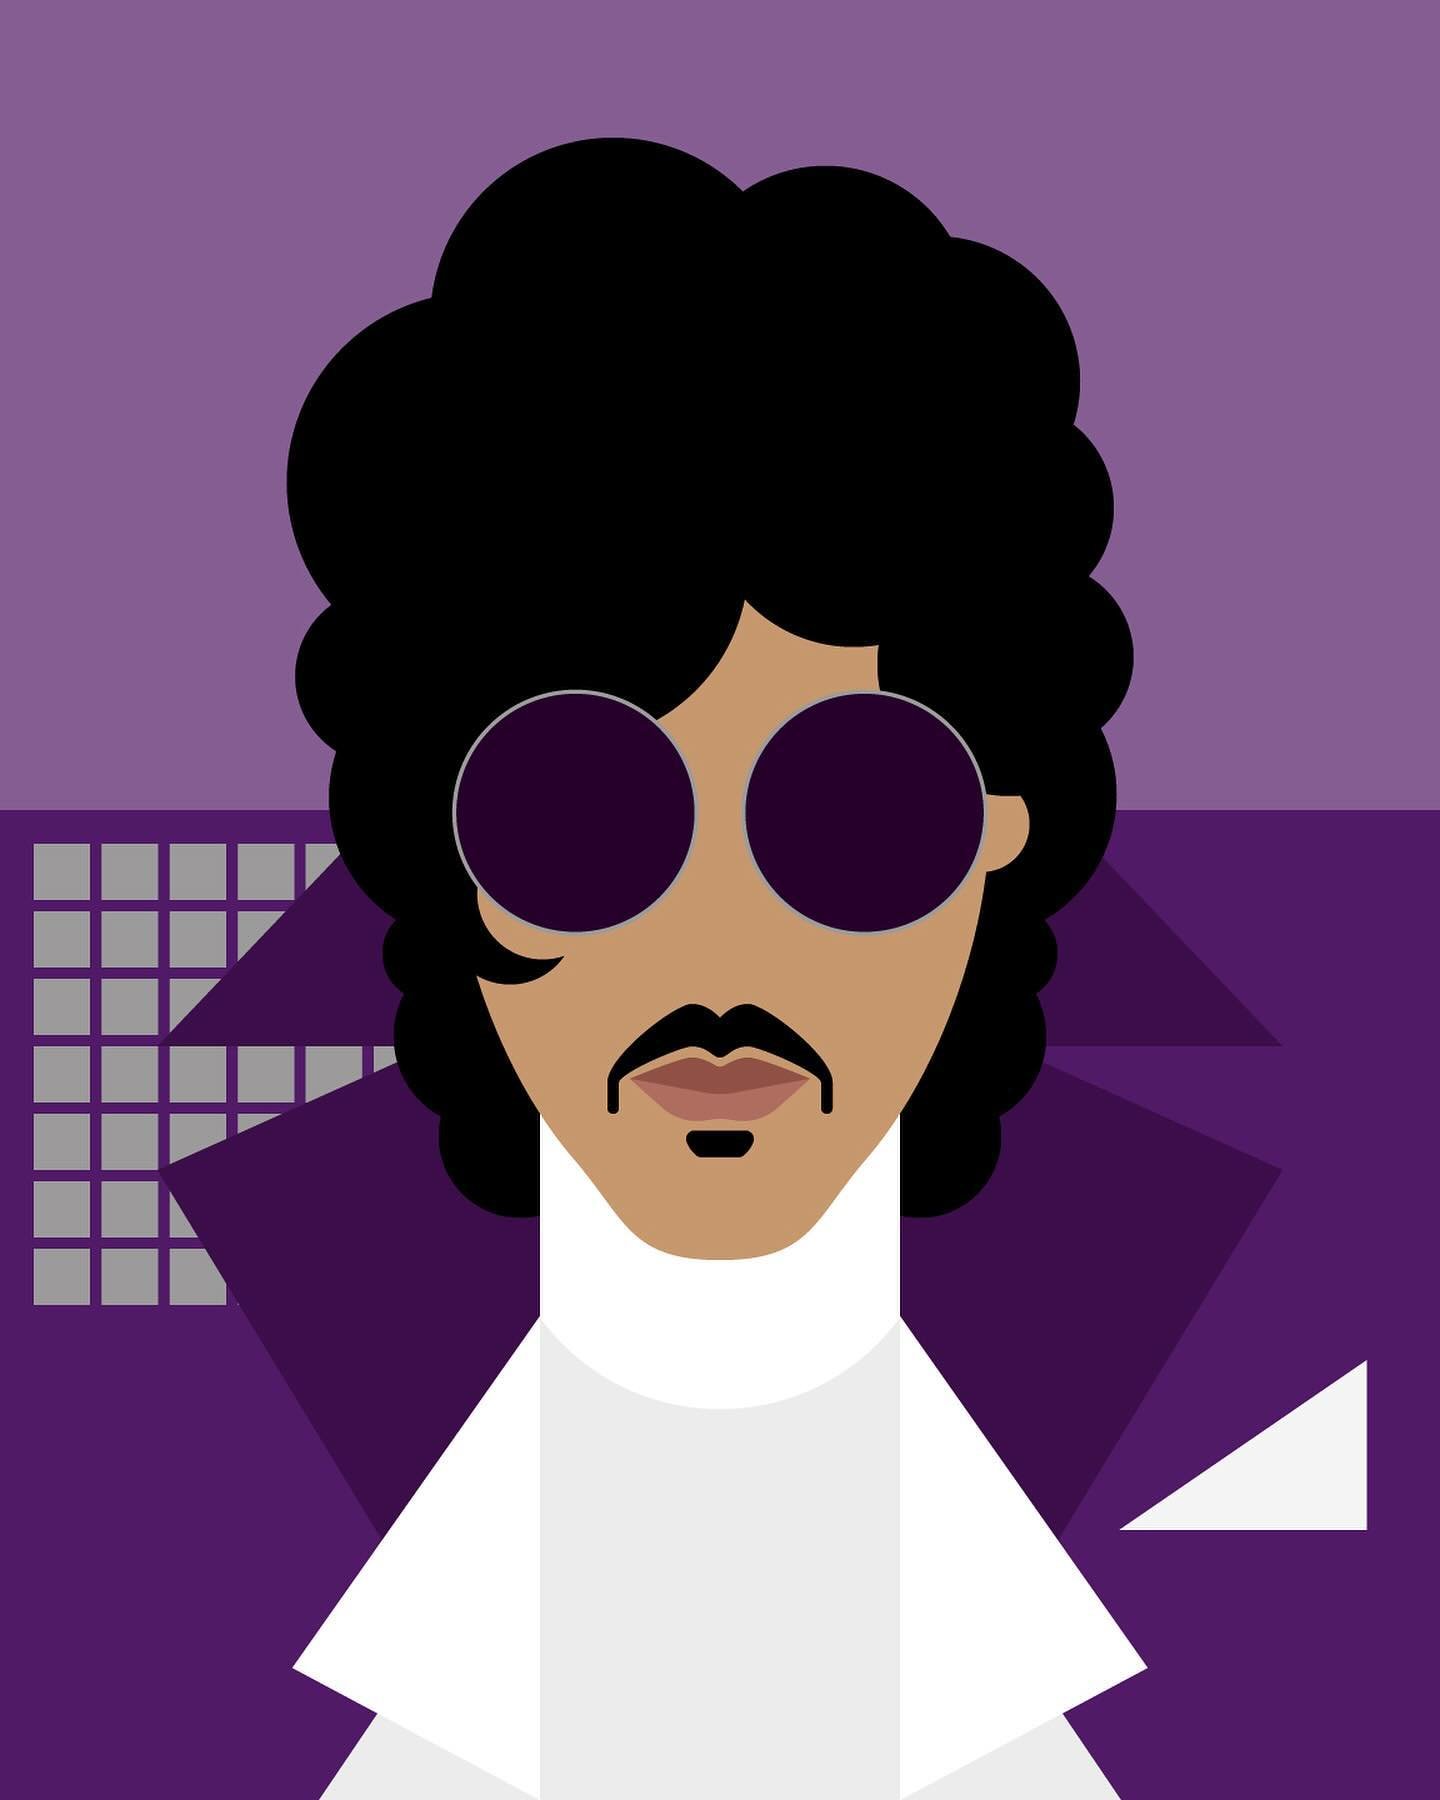 Here&rsquo;s an original piece from #themanyfacesofprince series to celebrate 1984.